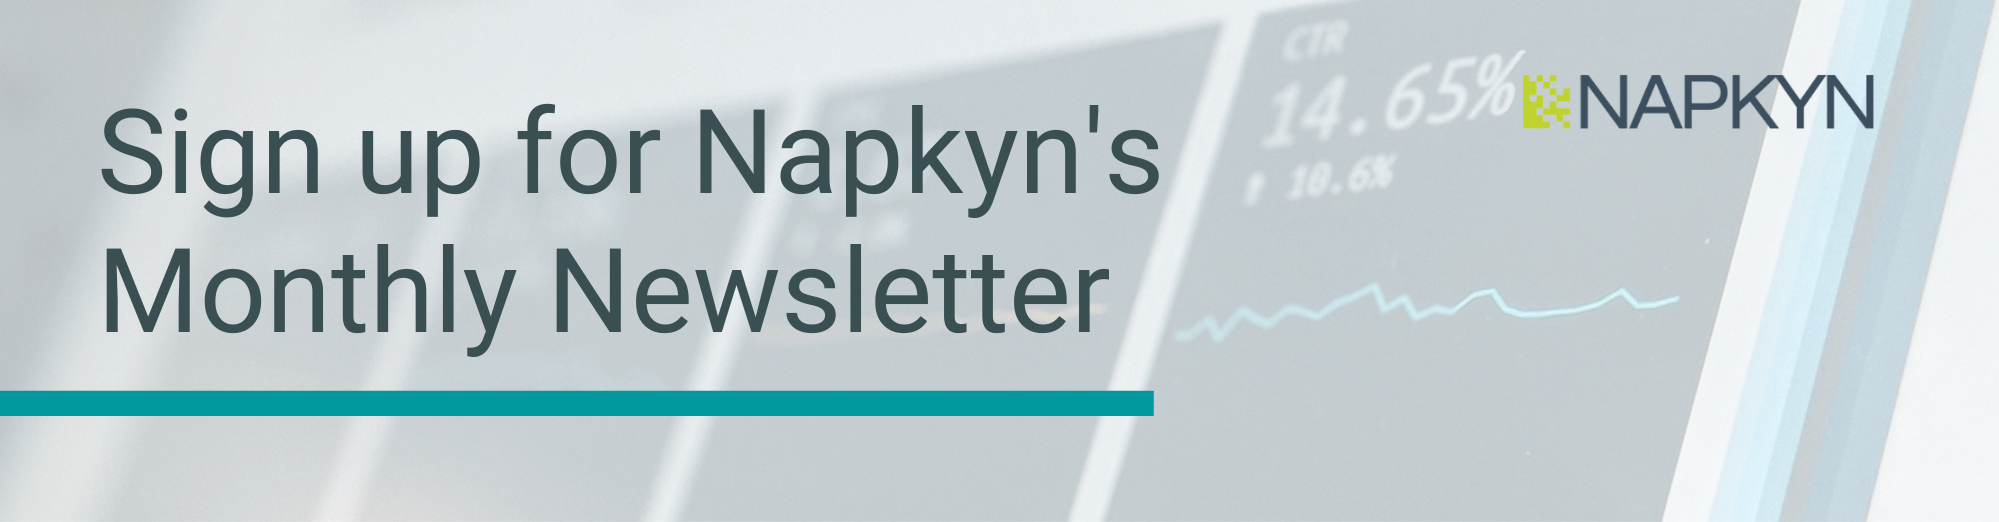 Sign up for Napkyns Monthly Newsletter